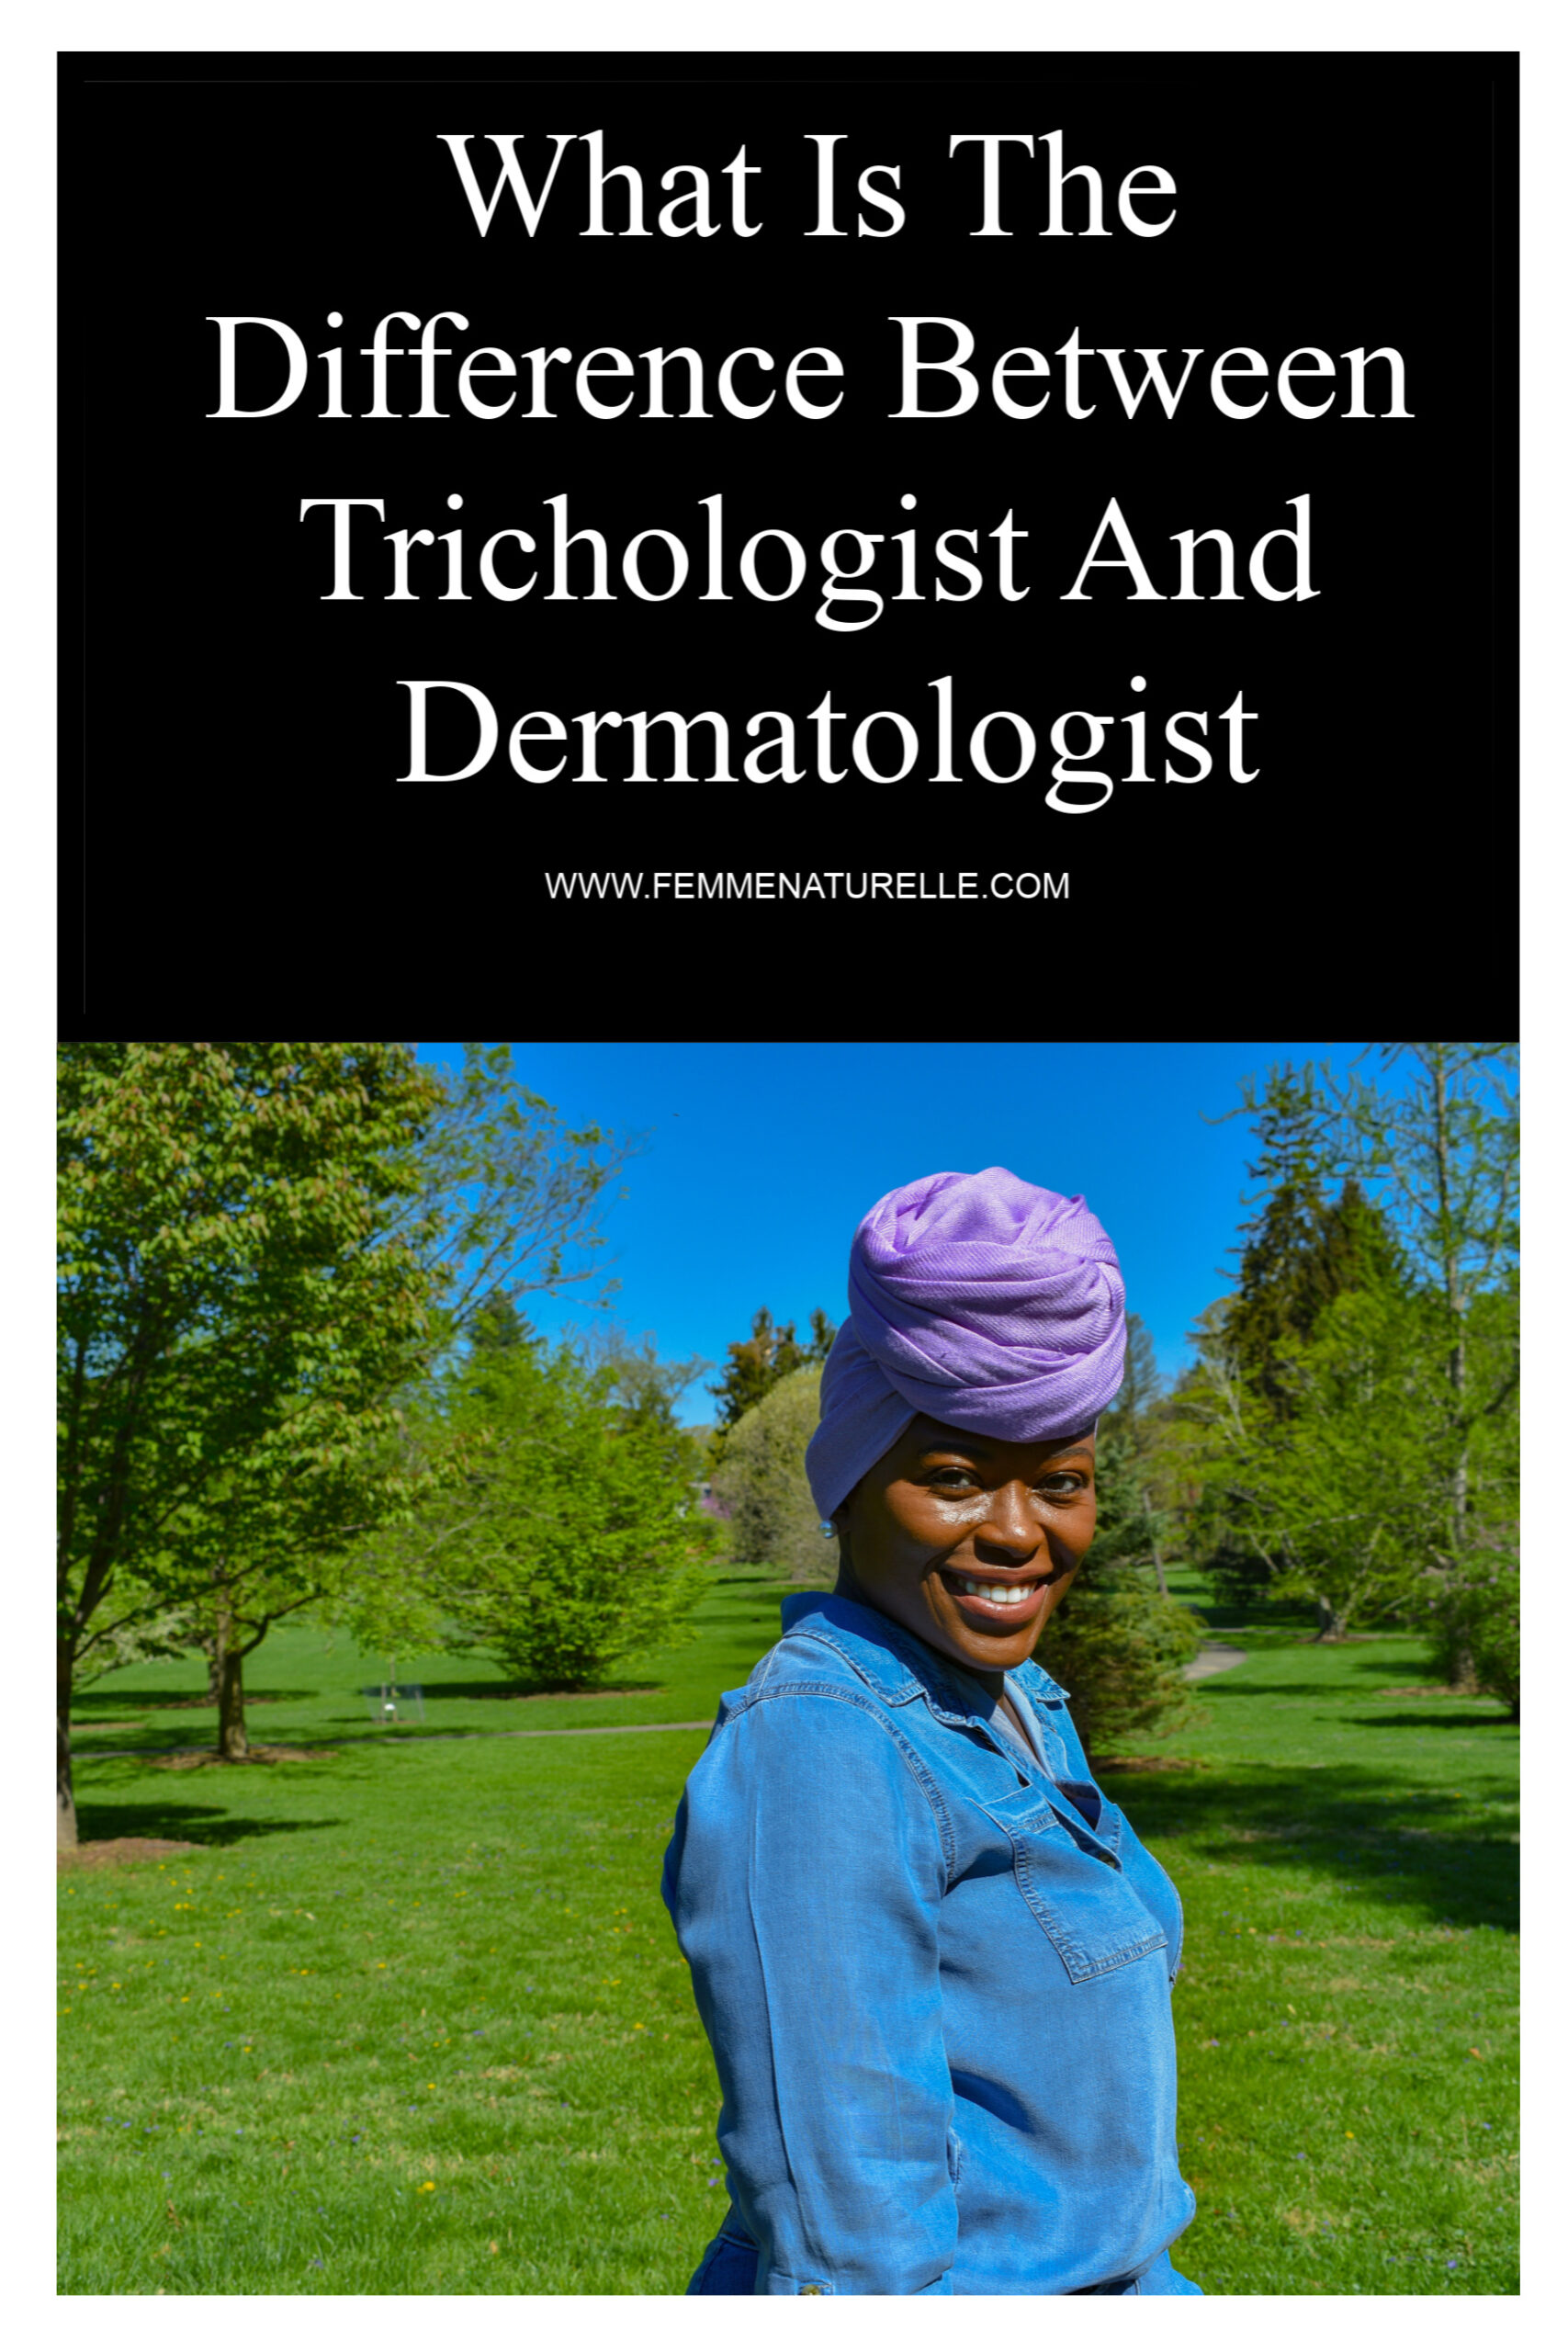 What Is The Difference Between Trichologist And Dermatologist